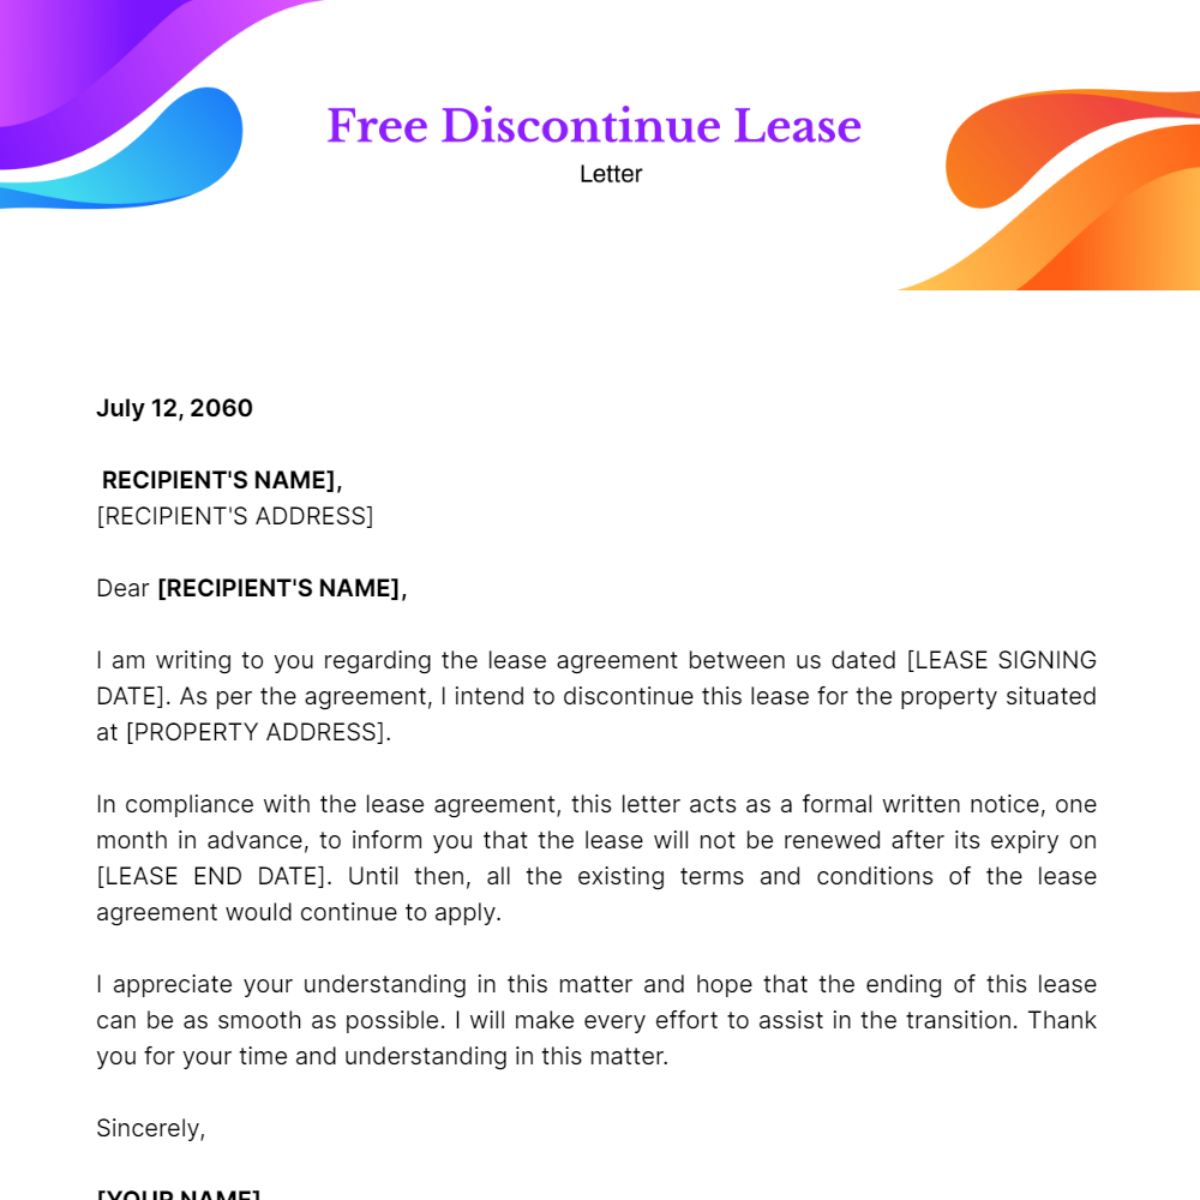 Discontinue Lease Letter Template